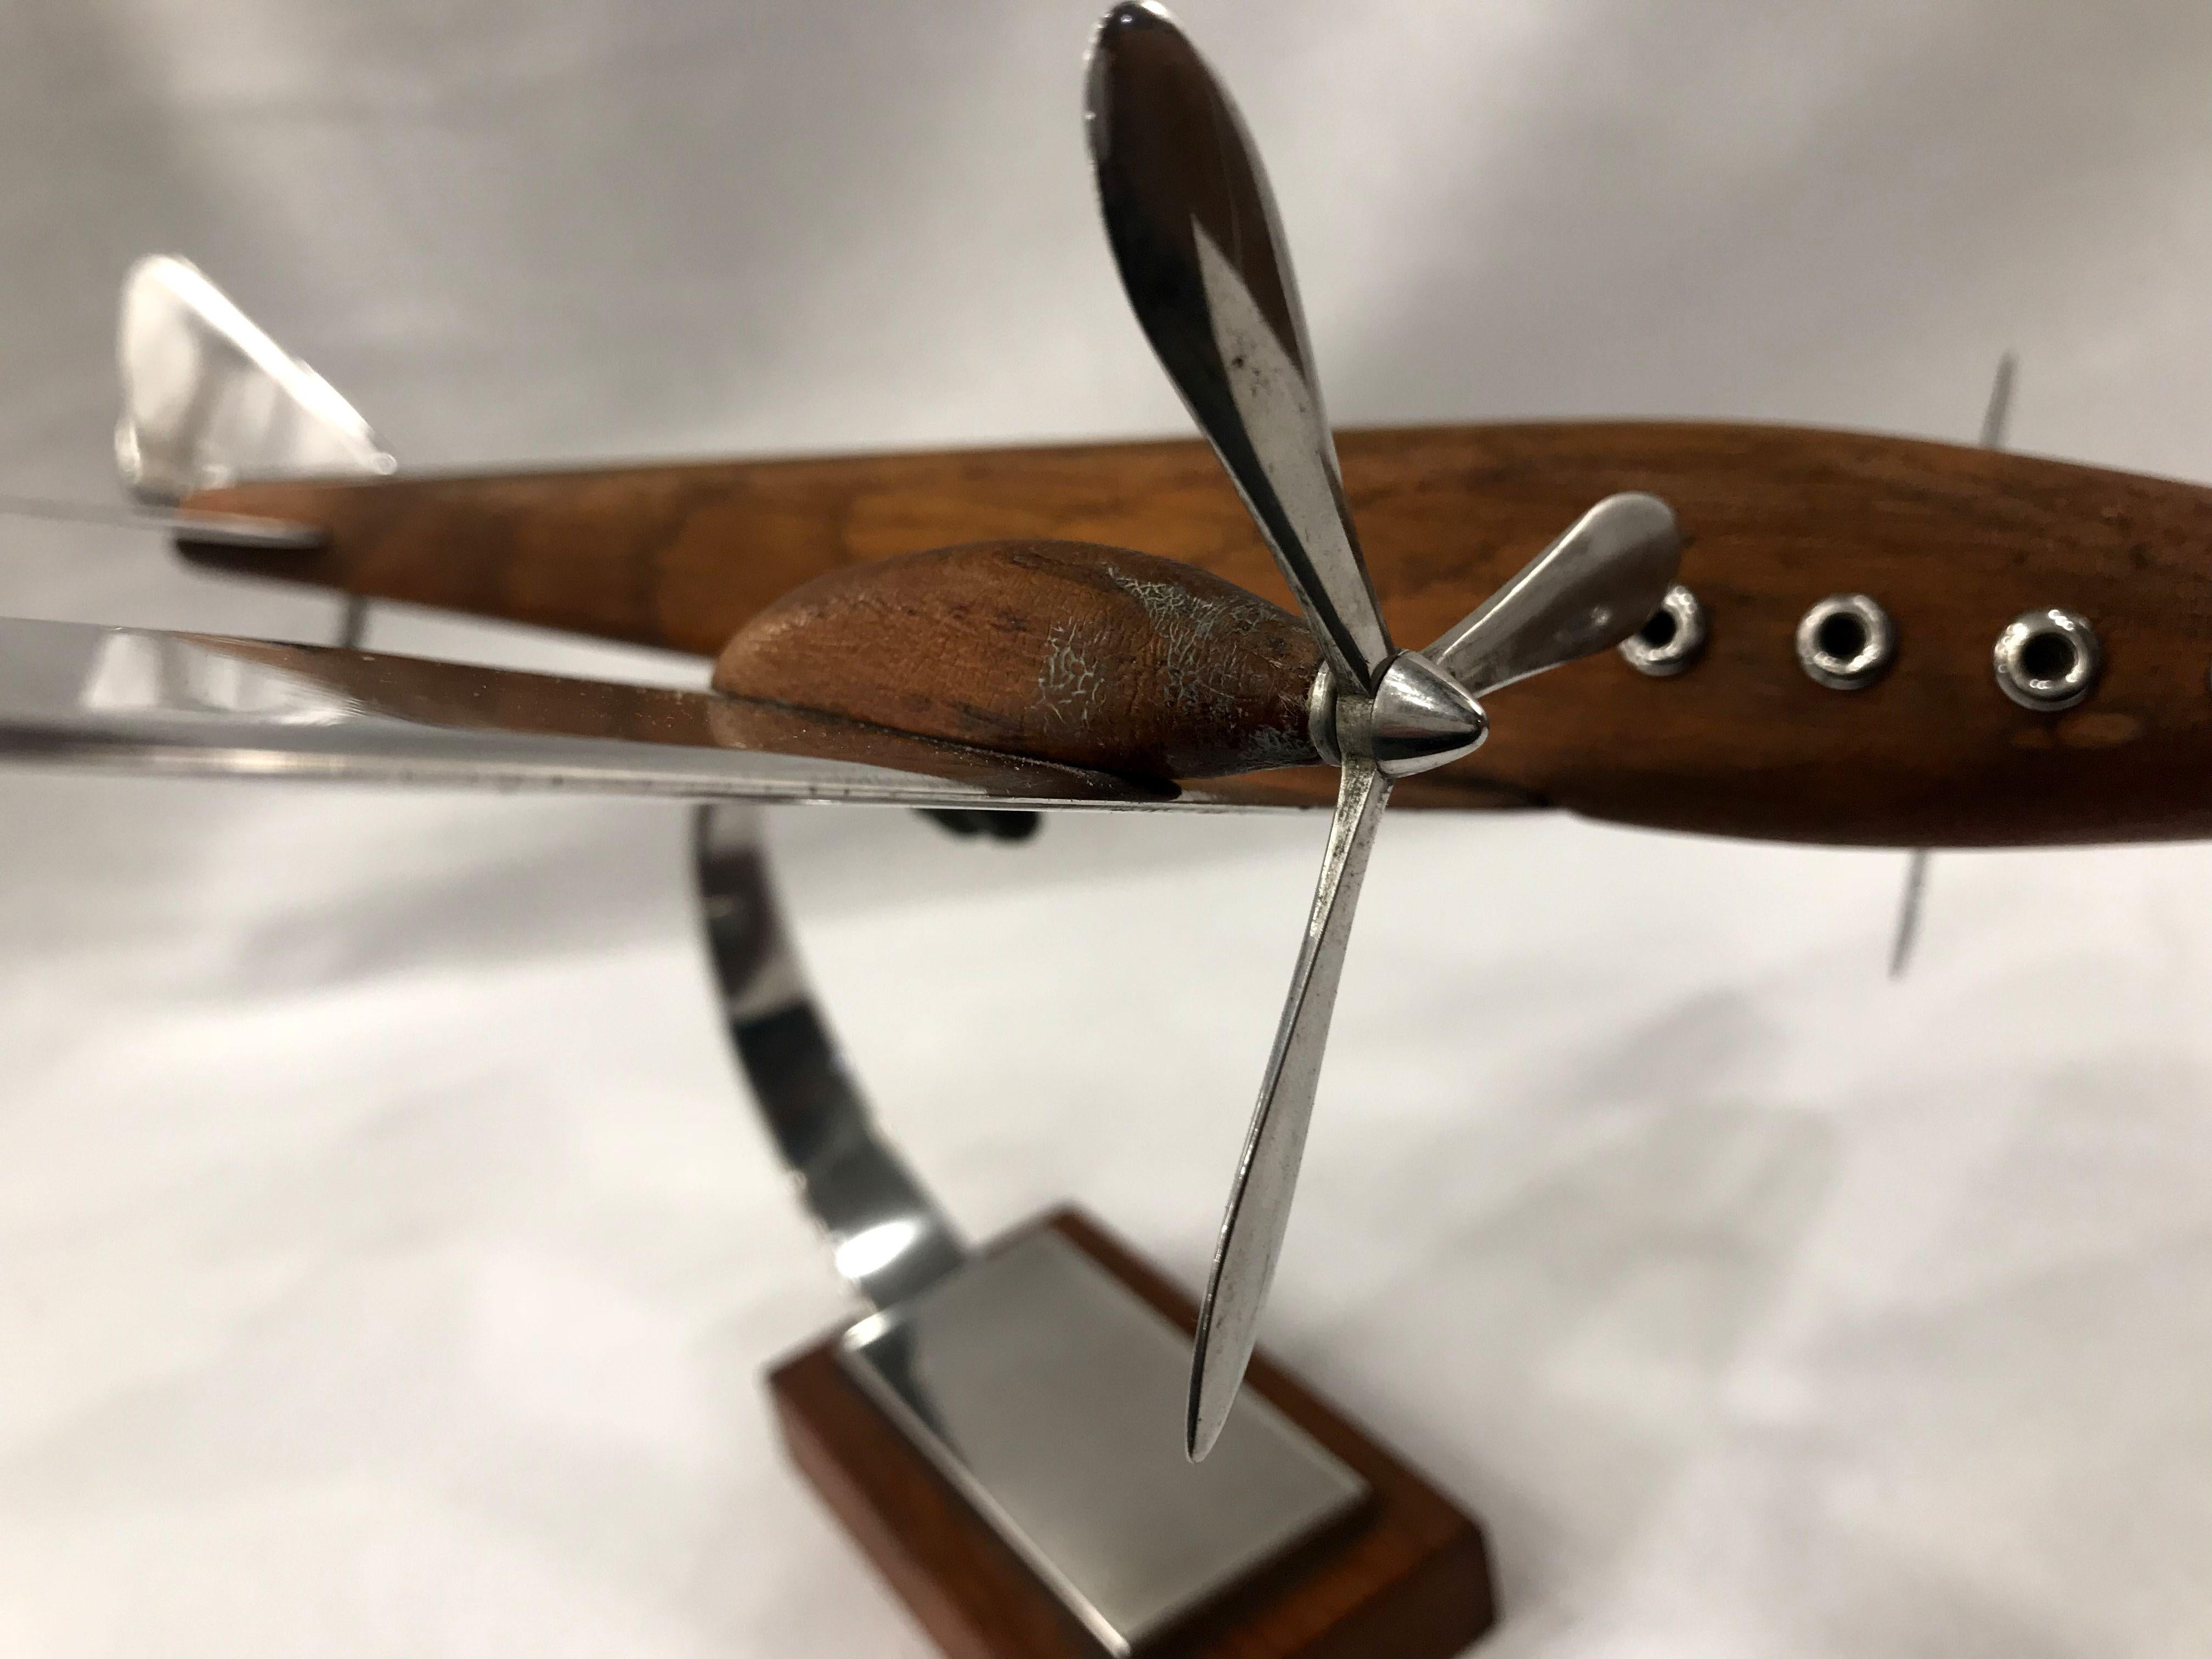 Large Art Deco Desk Model Airplane Aluminium and Teak Wood, France, 1930 In Good Condition For Sale In Budapest, Budapest